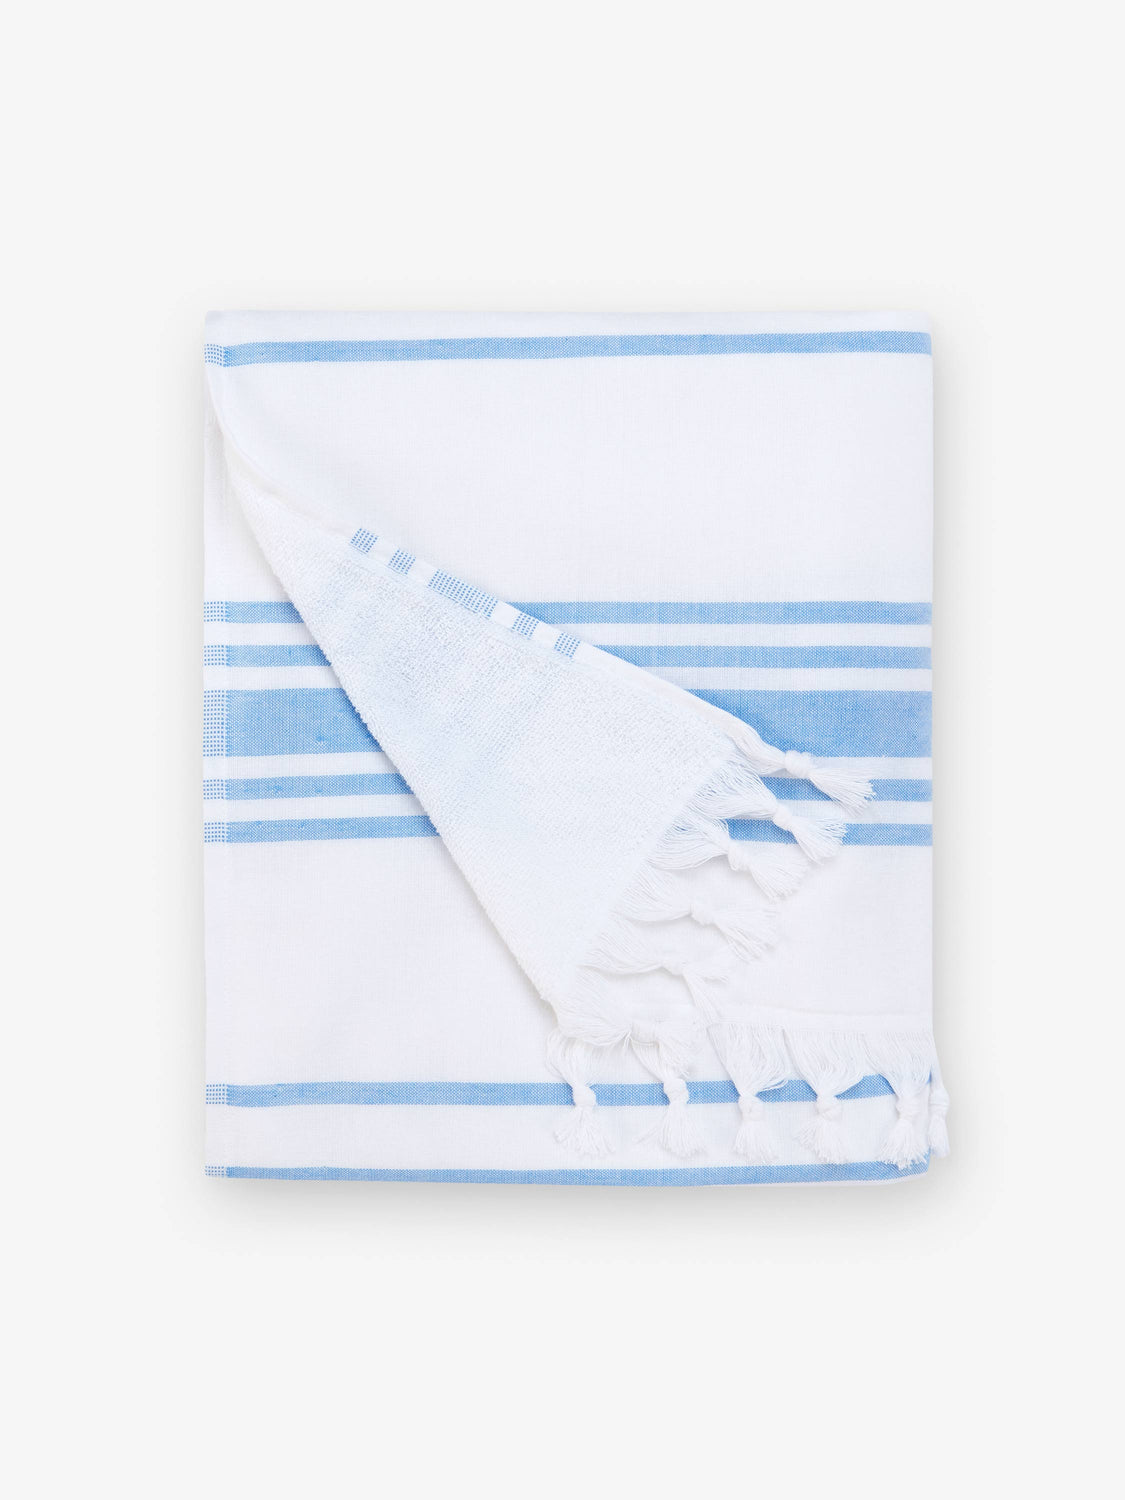 A folded white and light blue striped Turkish towel with white fringe.